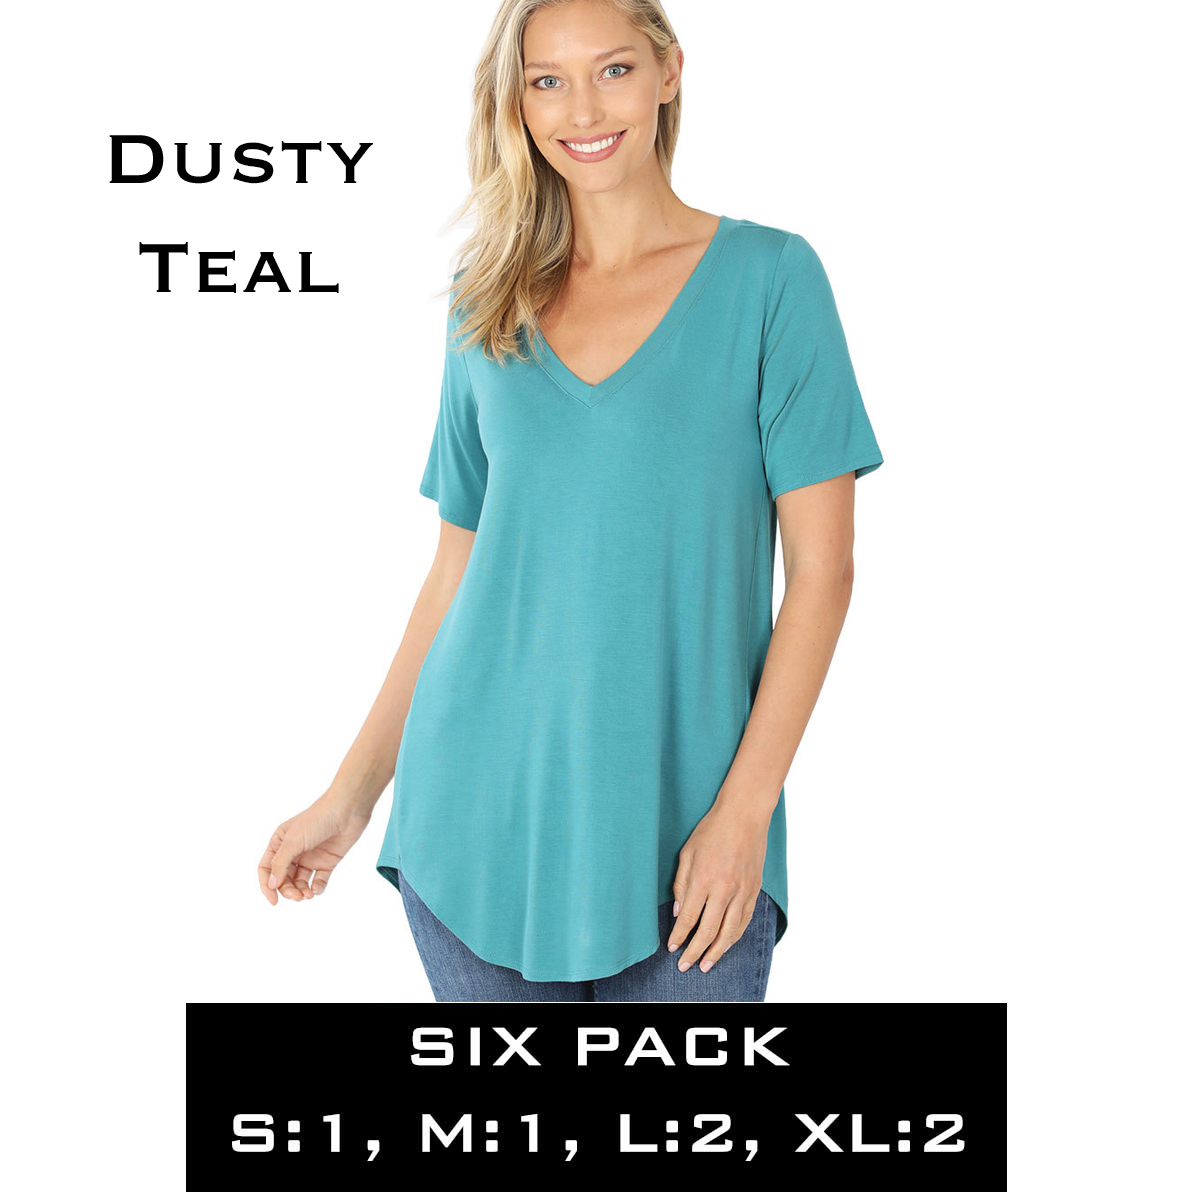 5541 - Dusty Teal - Six Pack